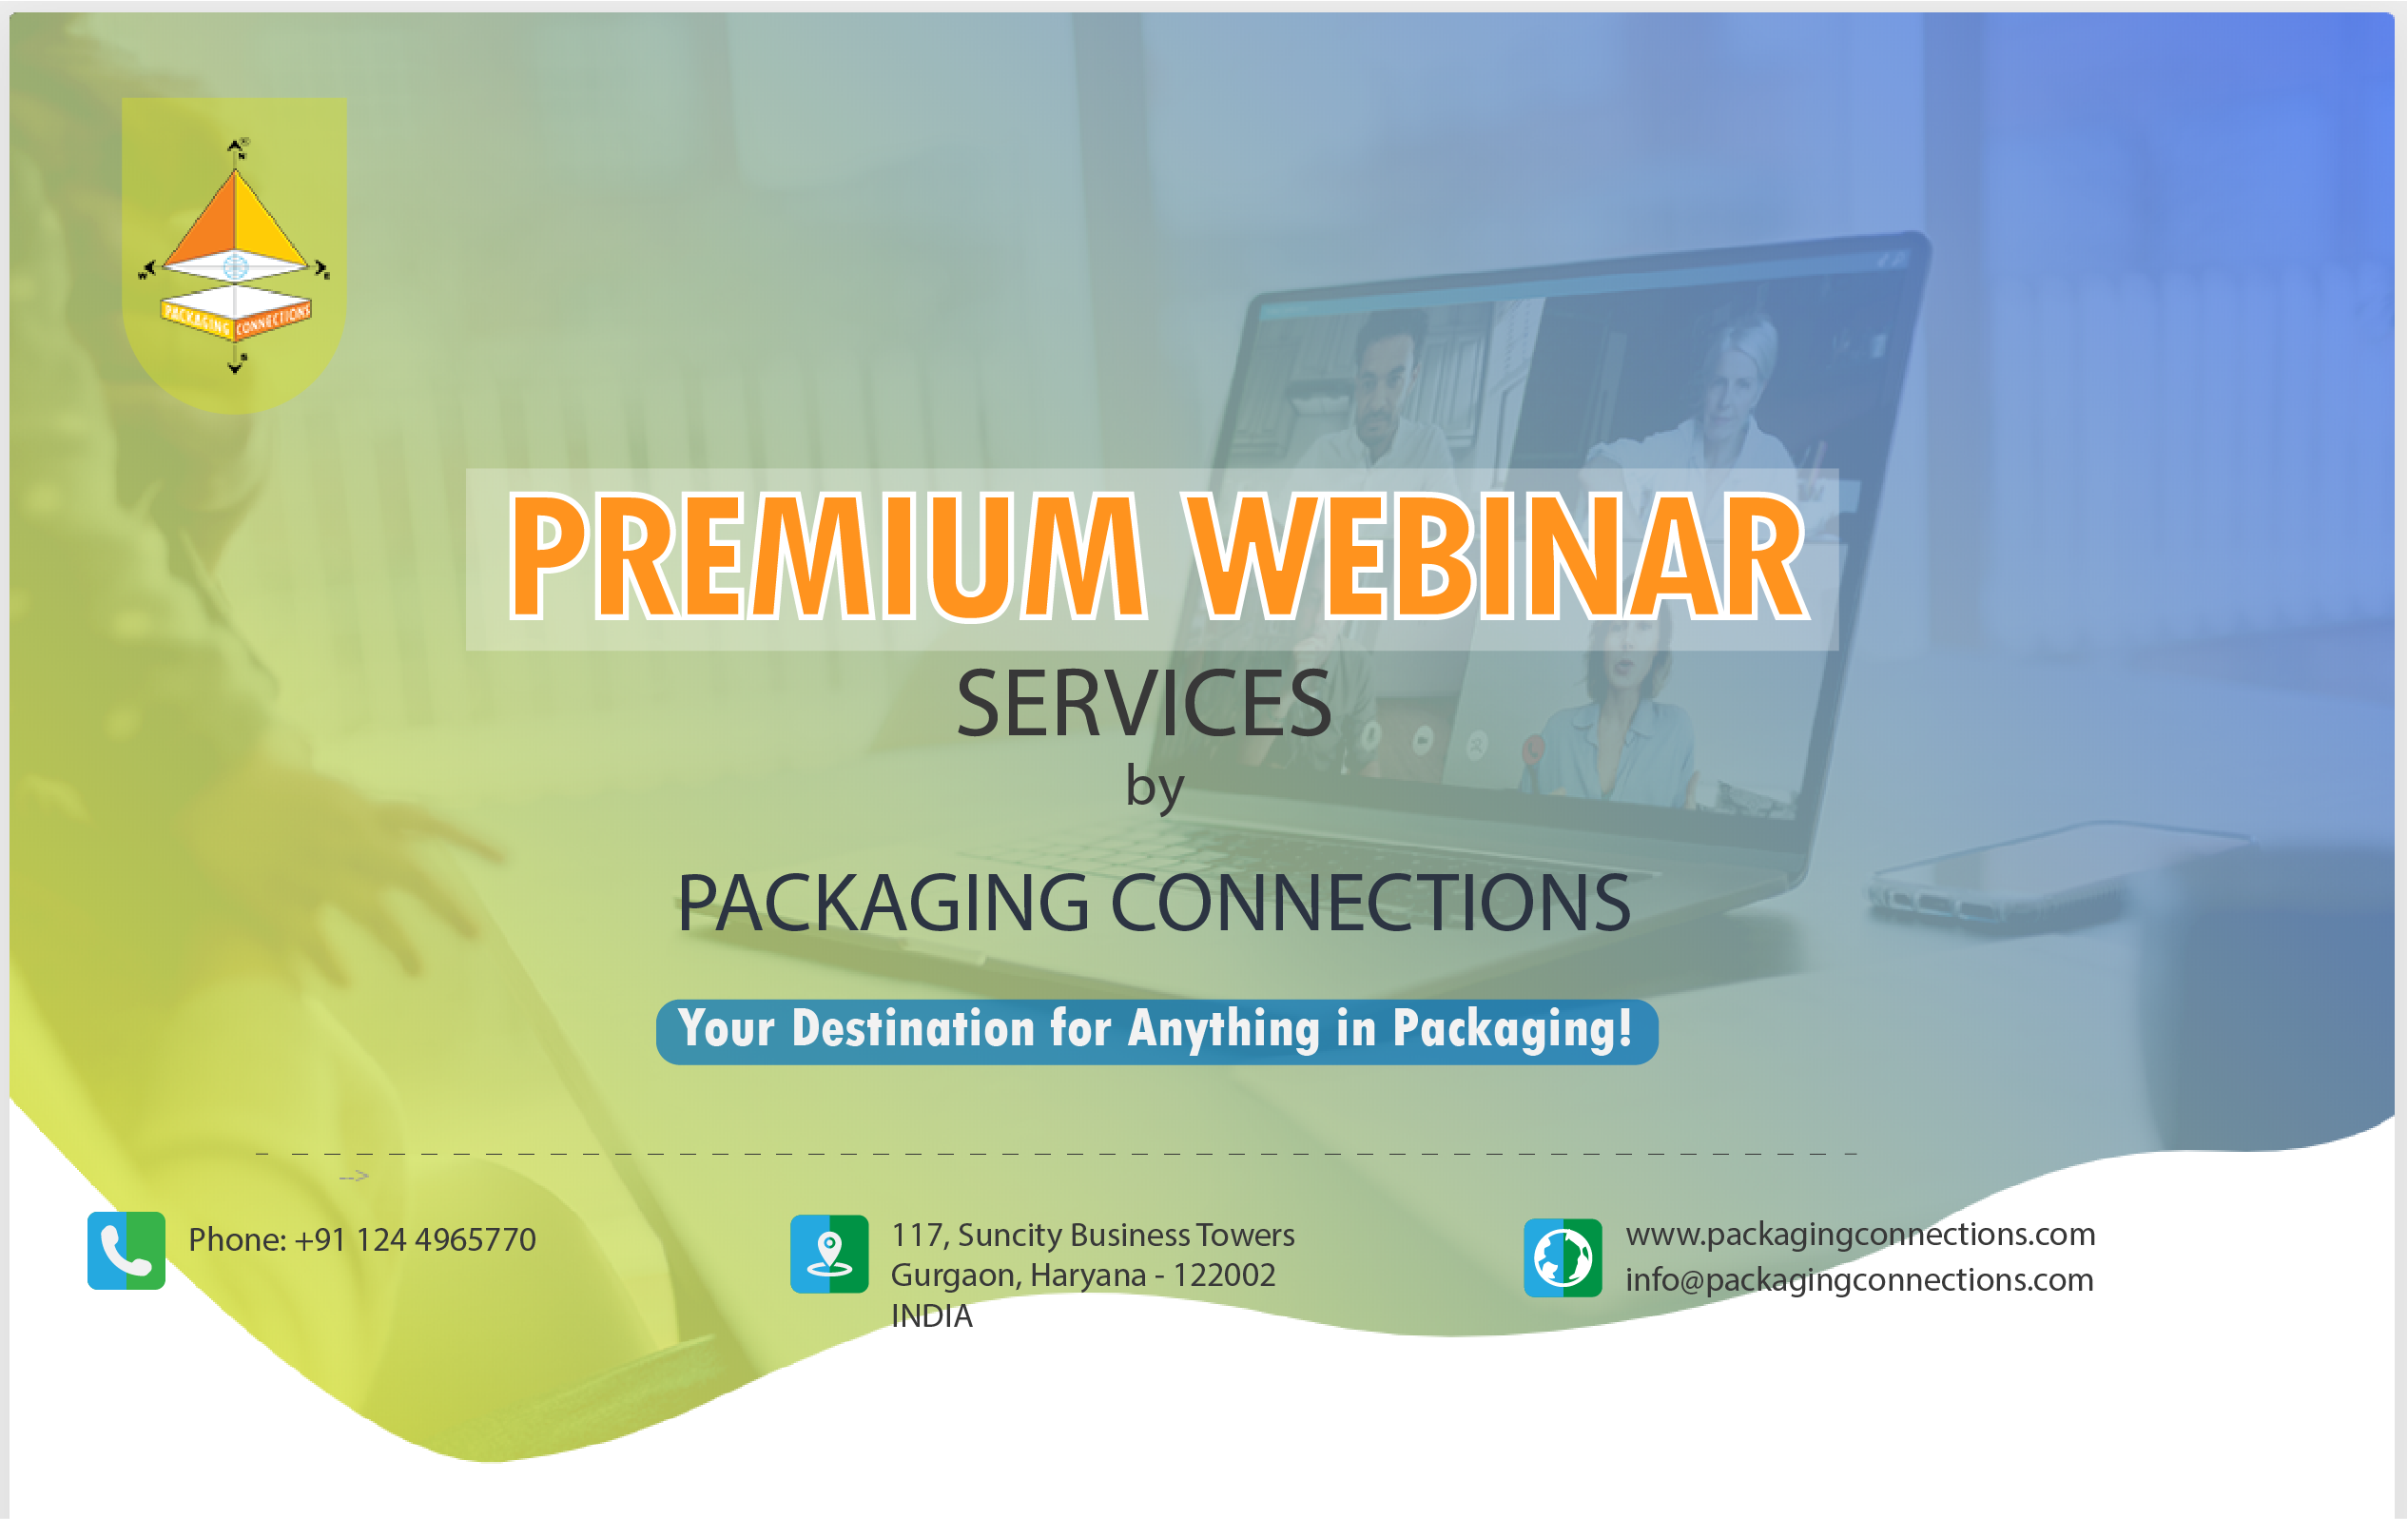 Webinar services by Packaging Connections